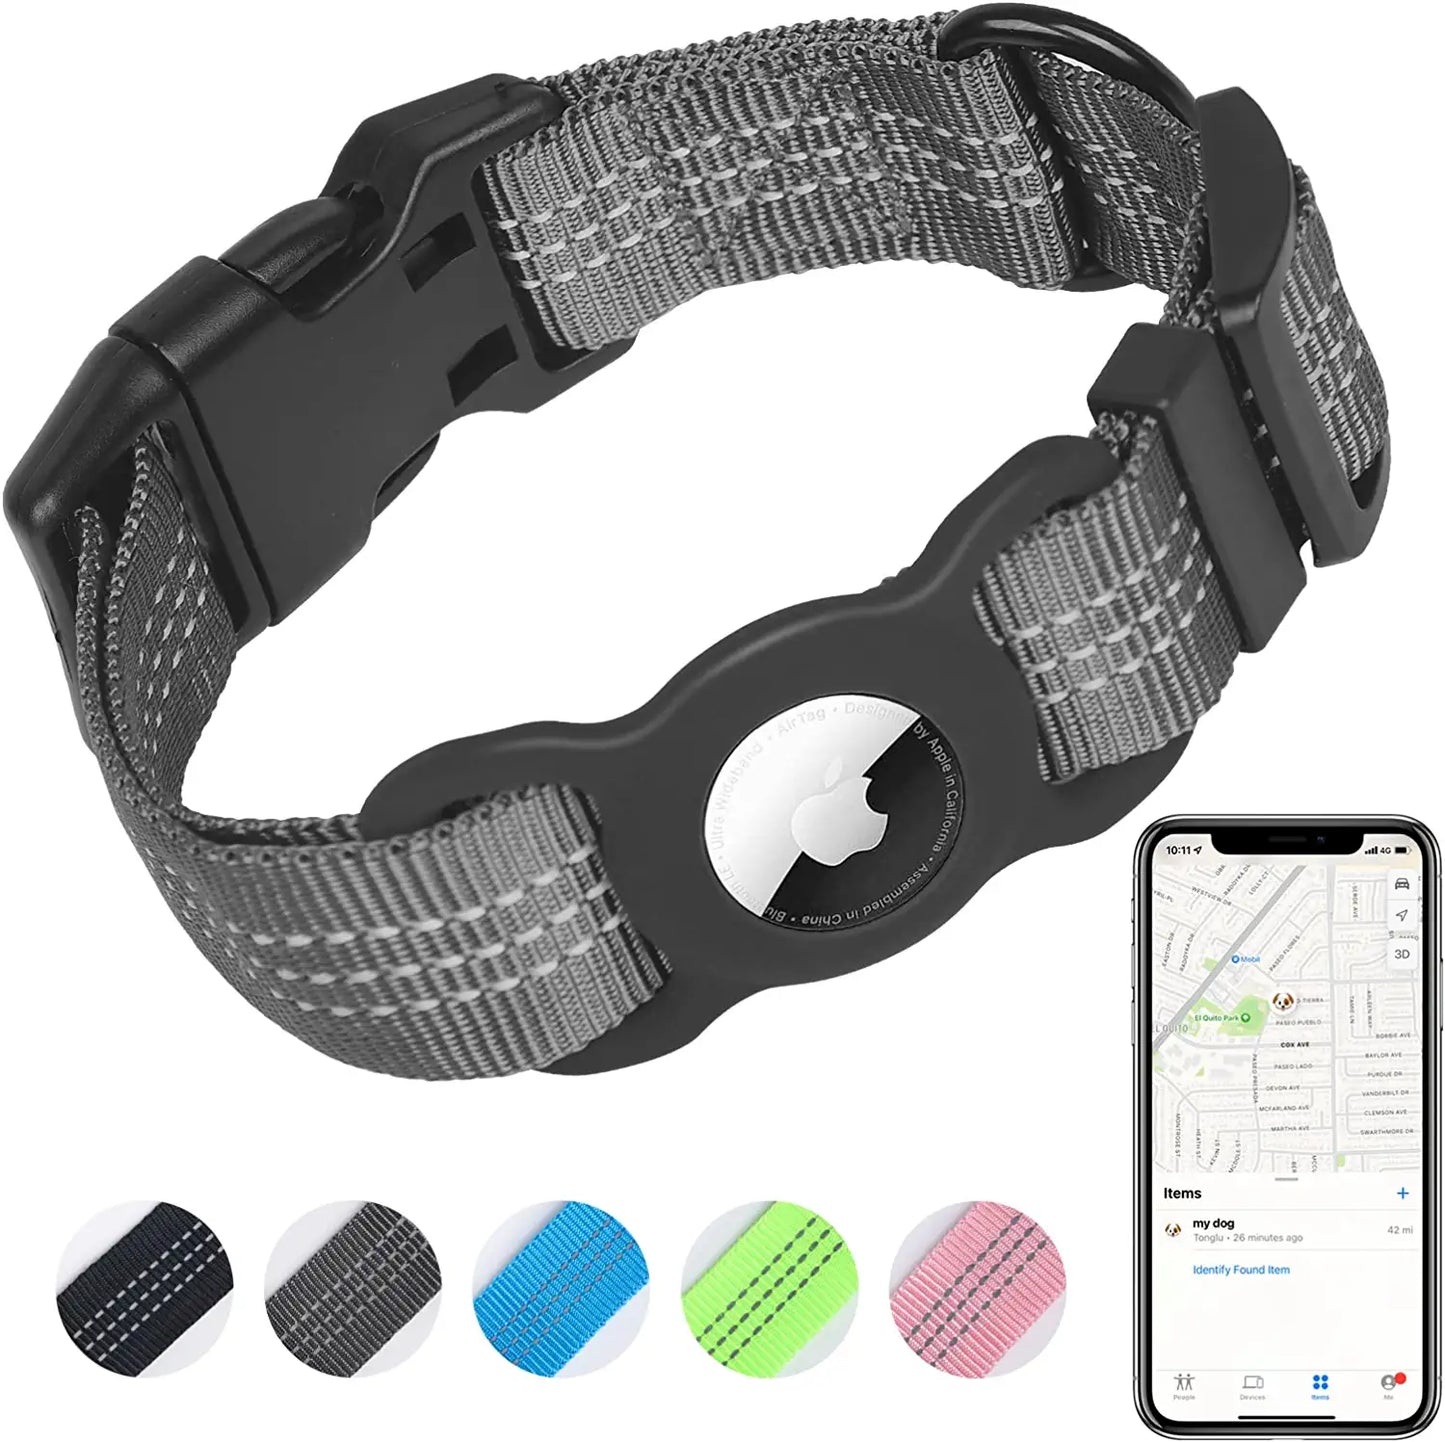 Airtag Dog Collar, Integrated Airtag Holder, for Iphone Positioning, Outdoor Activitiesanti-Lost, Reflective Apple Airtag Dog Collar, Sturdy and Durable, Dog Collar That Fits Most Dogs. (M, Black)